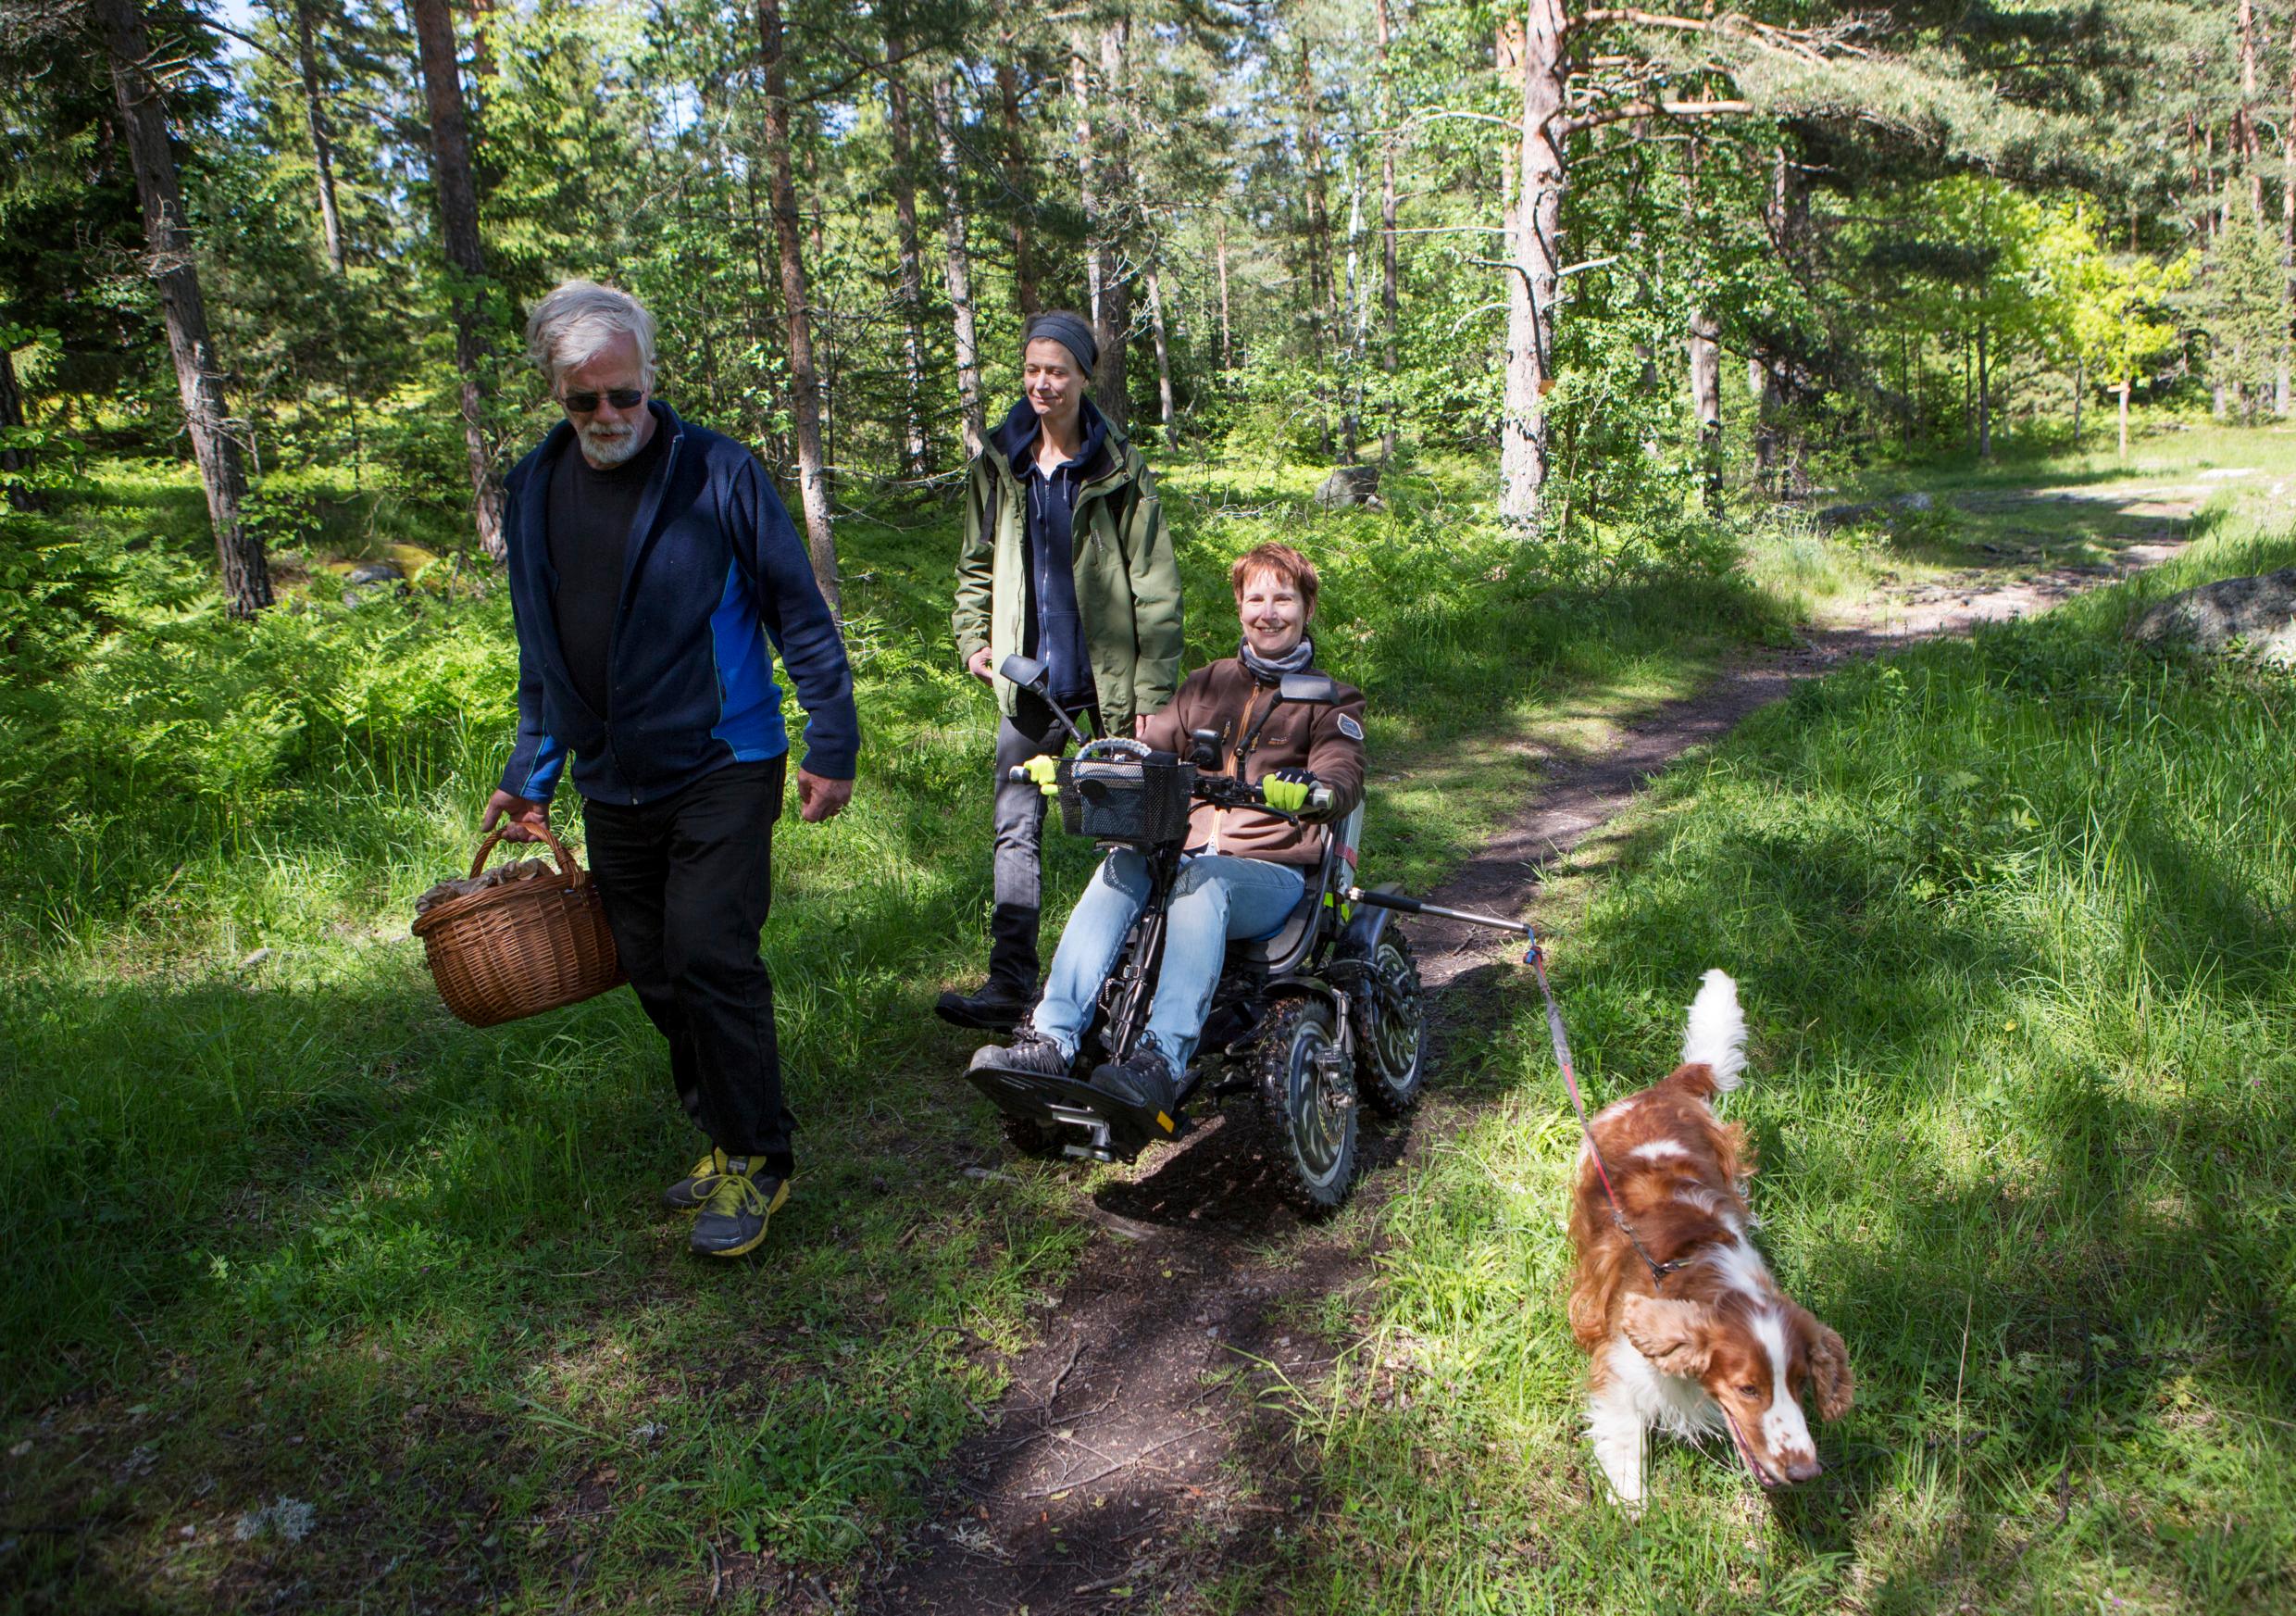 Two people walking, one person in a wheelchair and a dog – all out in a green forest.